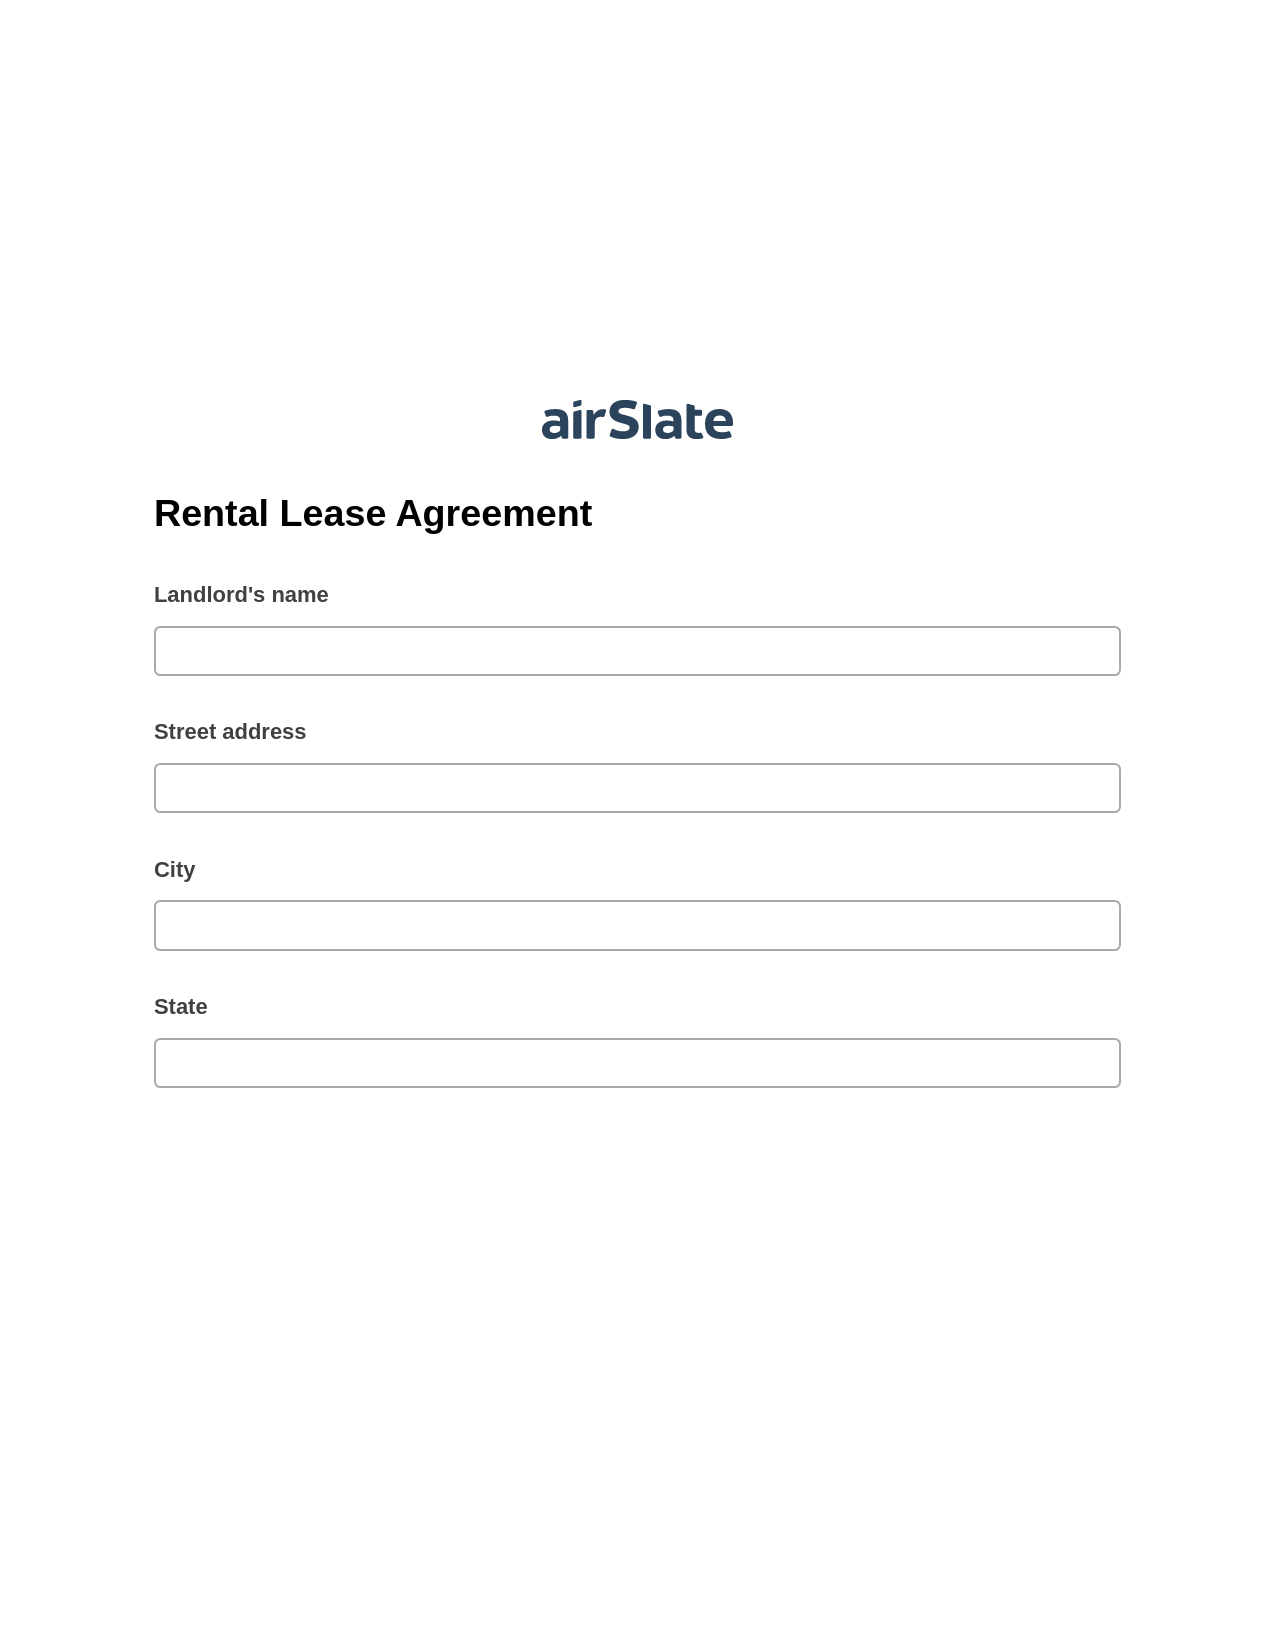 Multirole Rental Lease Agreement Pre-fill from Excel Spreadsheet Dropdown Options Bot, Document Hide Bot, Email Notification Postfinish Bot